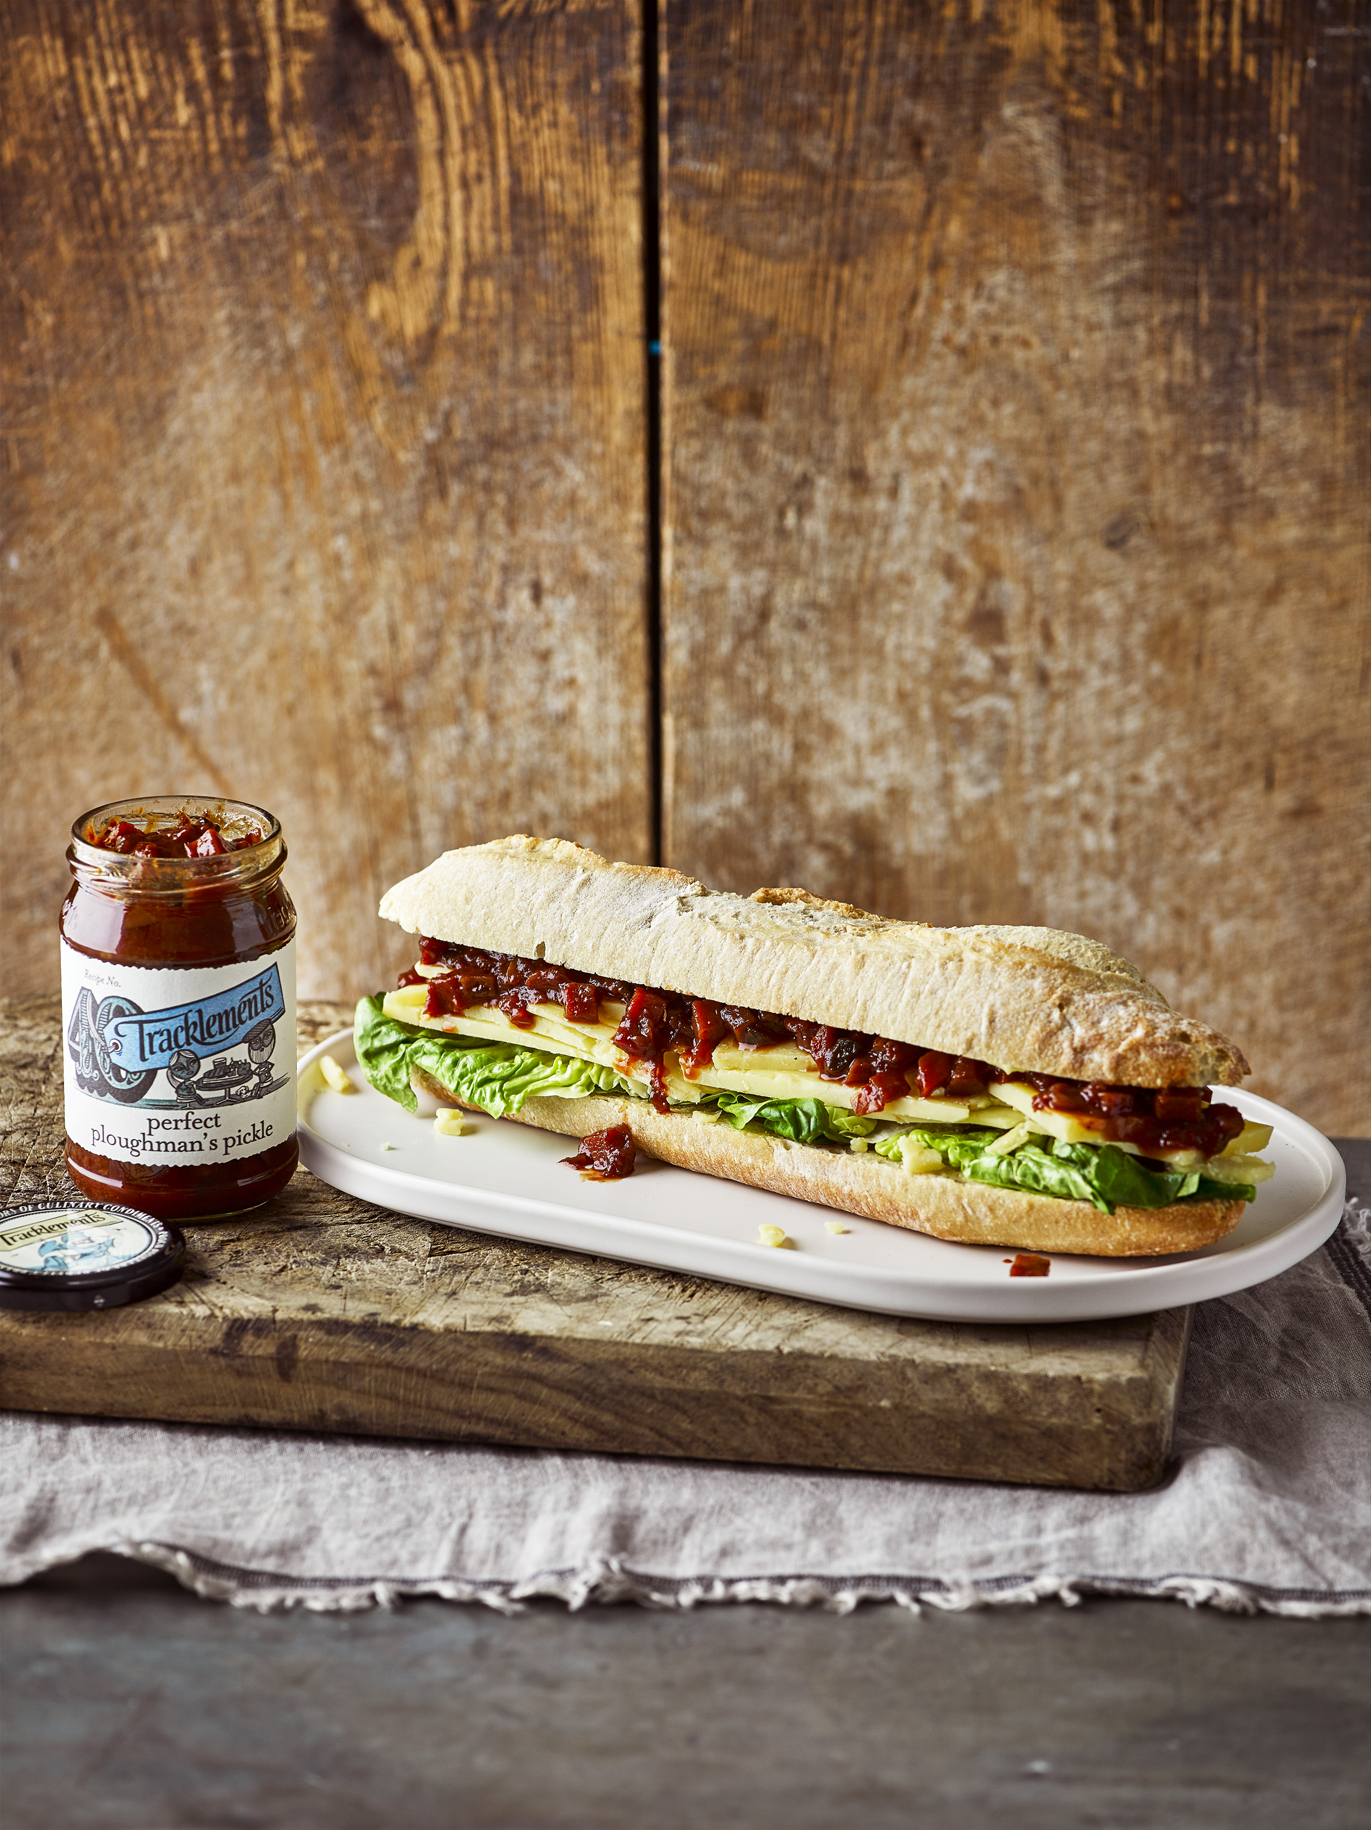 Cheddar Ploughman's Sandwich with Perfect Ploughman's Pickle